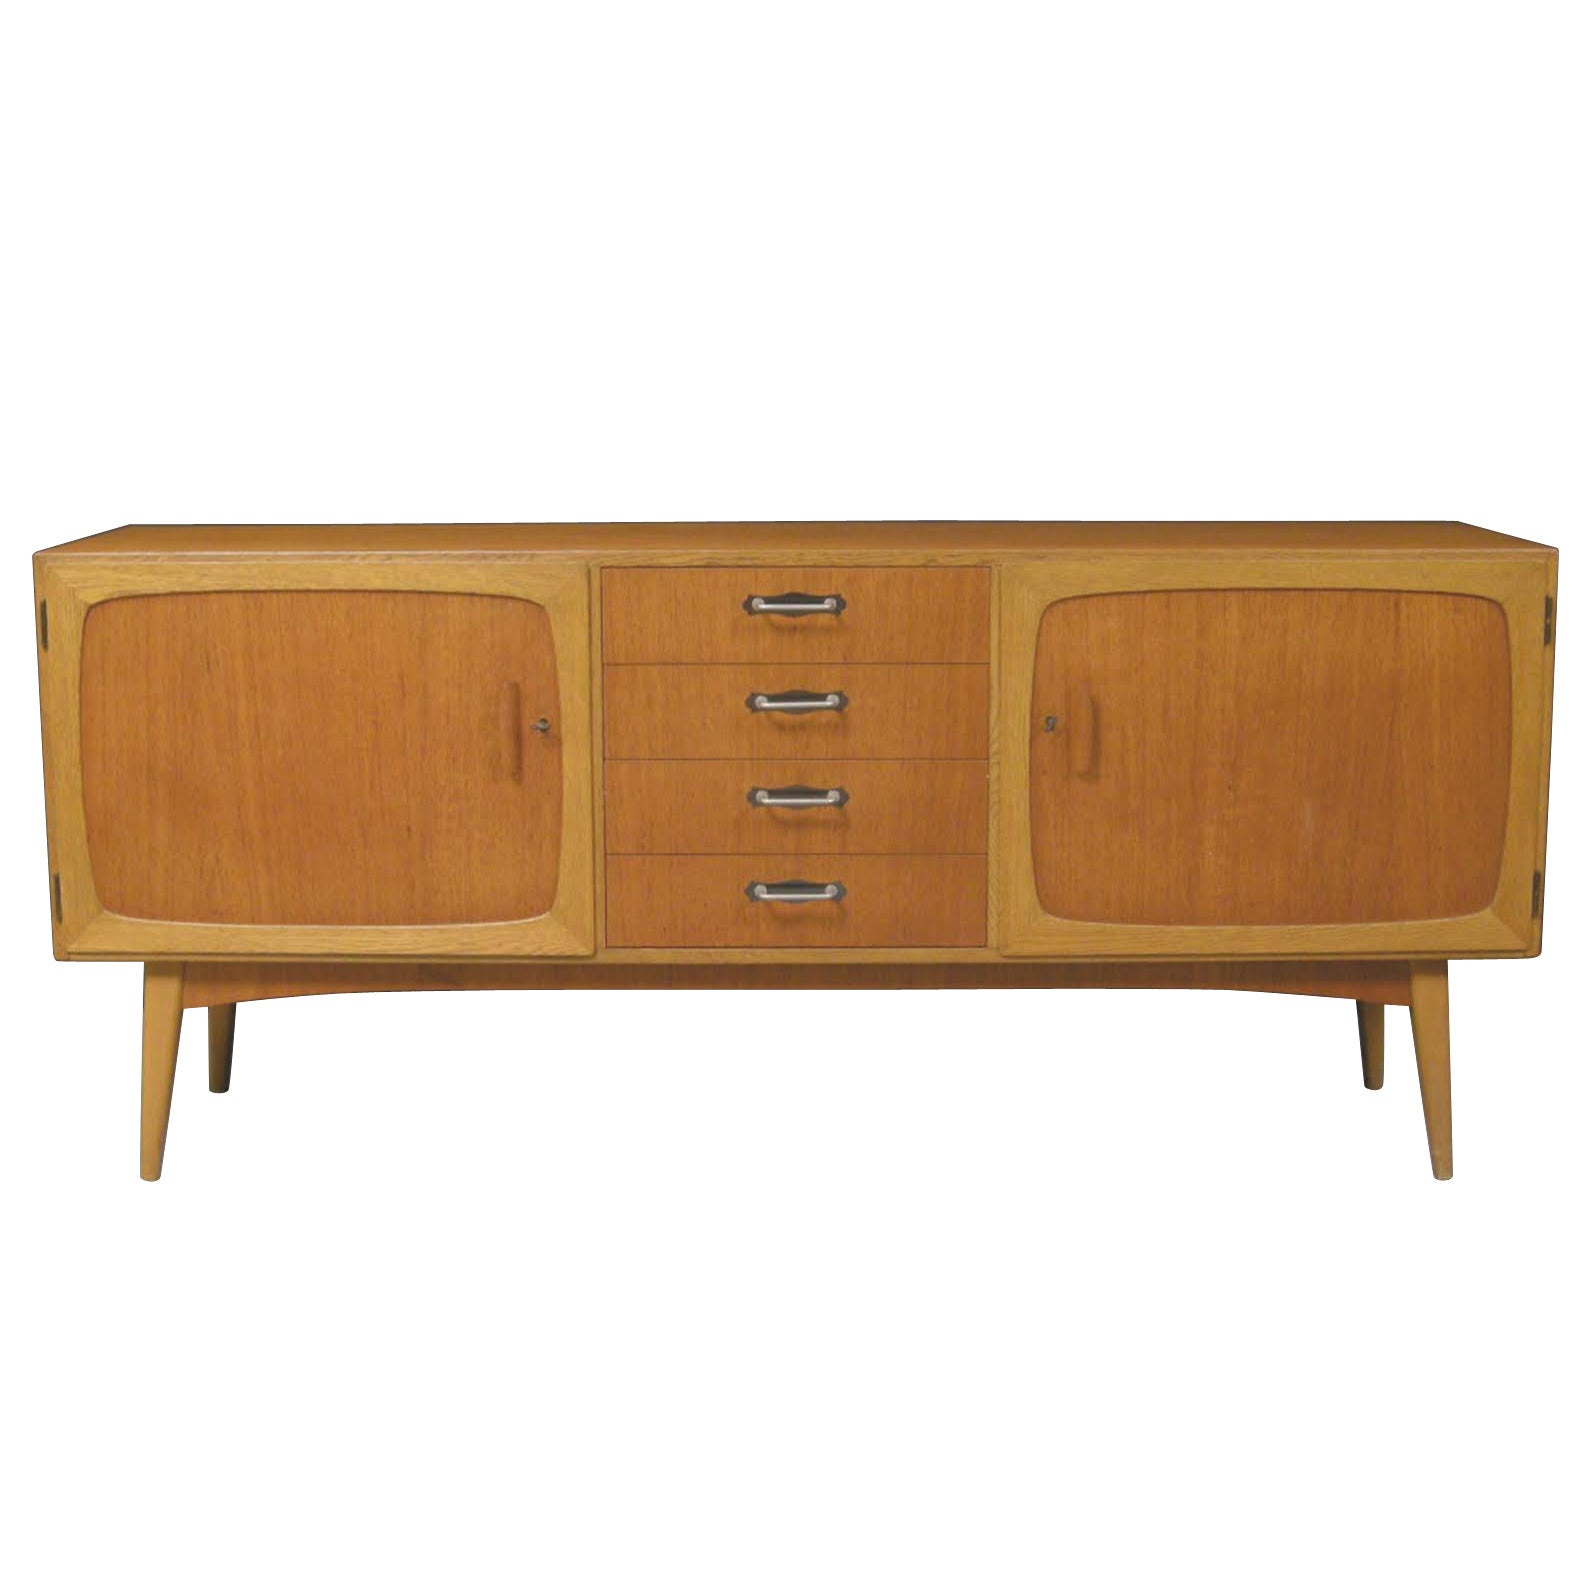 1950s Danish Teak and Oak Sideboard with Four Center Pull-Out Drawers For Sale